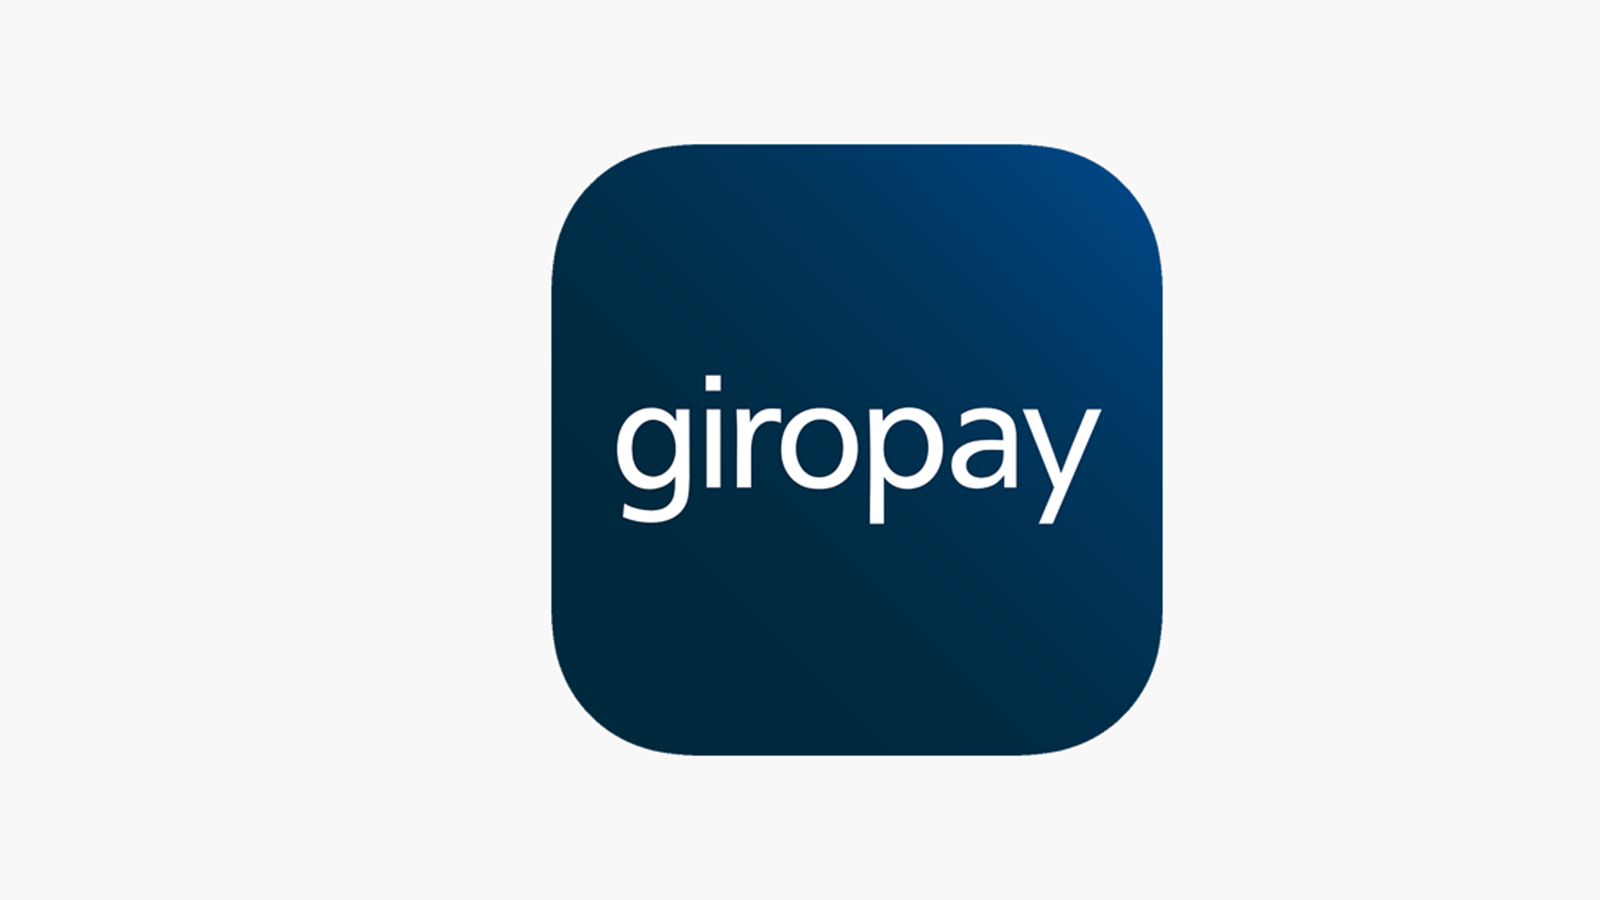 Giropay Review - Guide to Giropay Online Casinos